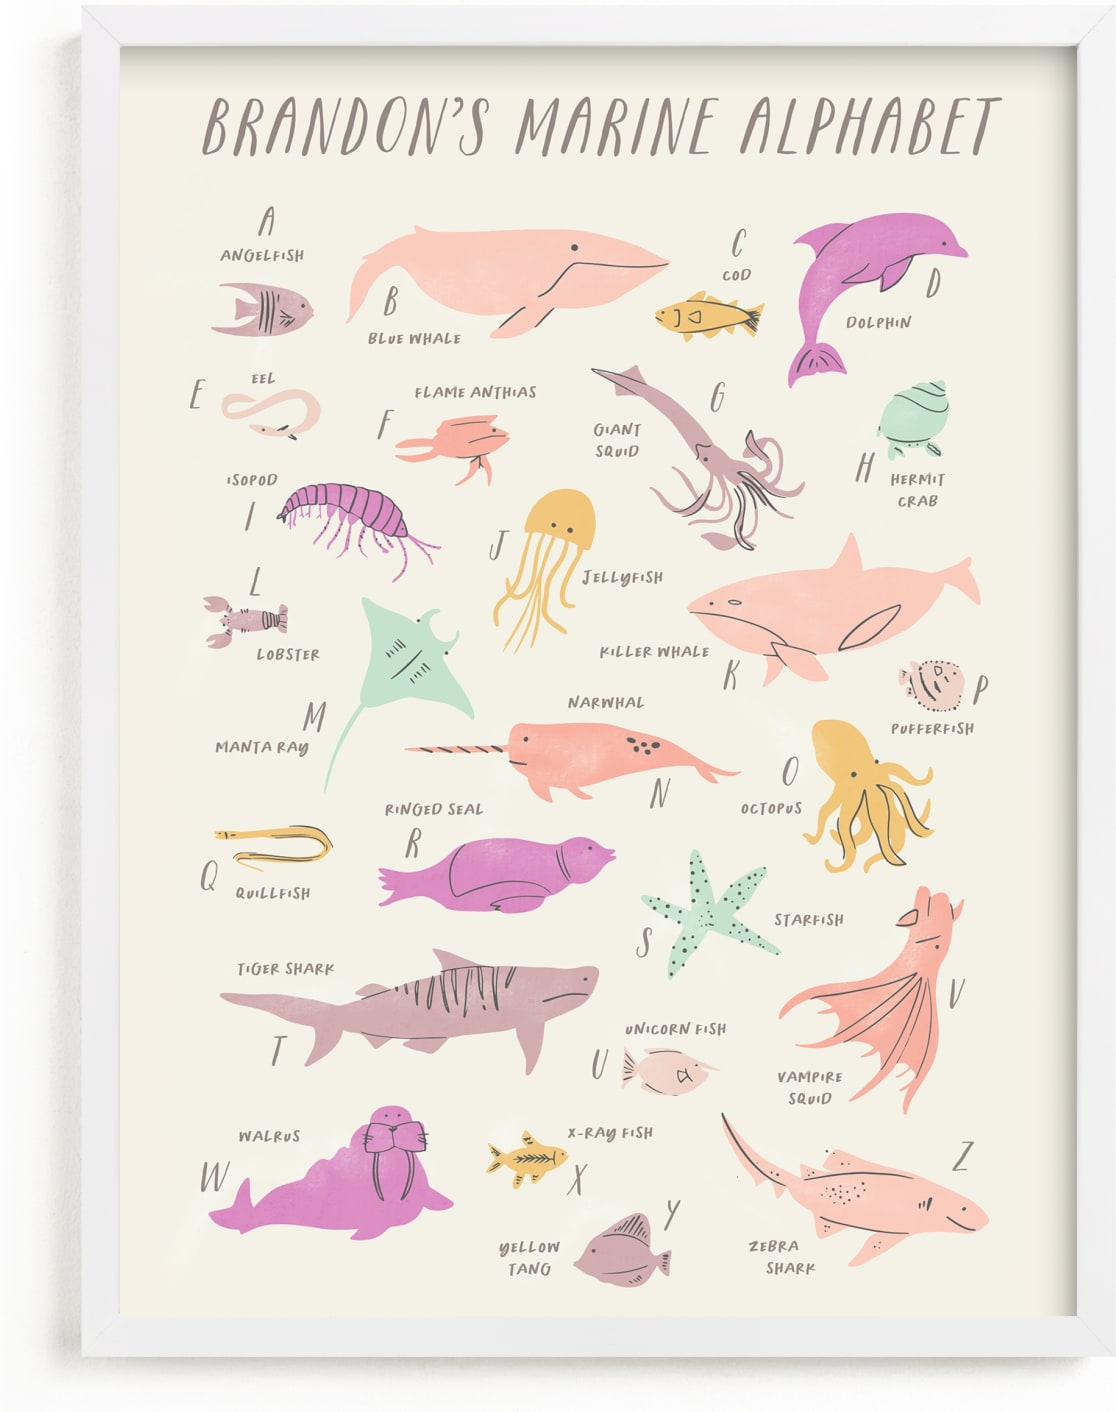 This is a colorful personalized art for kid by Creo Study called Sea life alphabet.